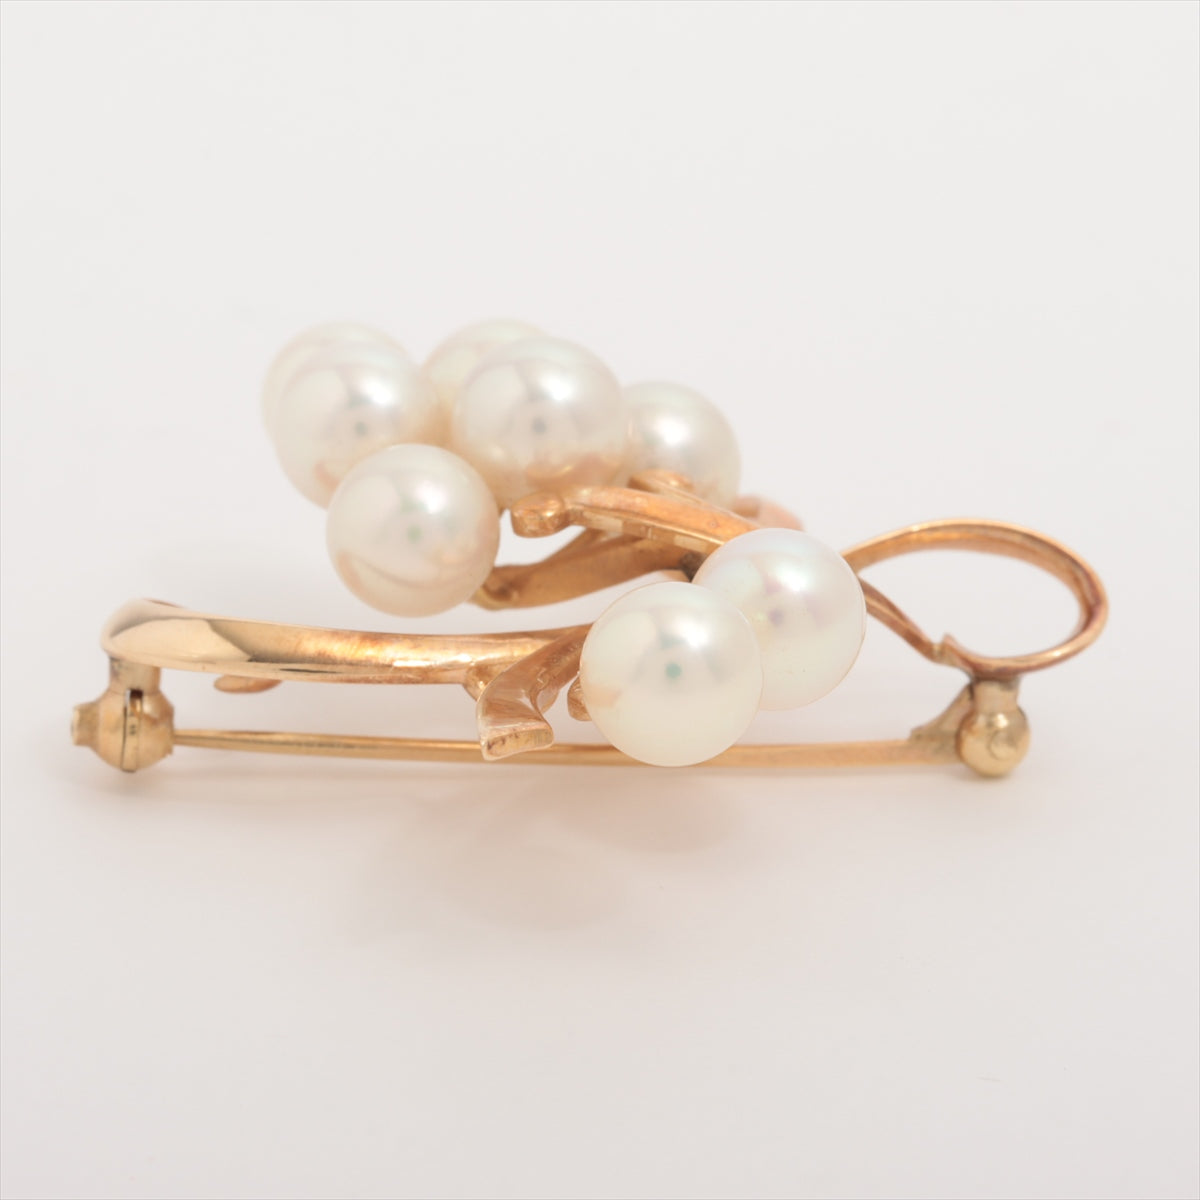 Mikimote Pearl Brooch K14 (YG) 8.8g about 6.5-7.0mm g-coloured hole-hole